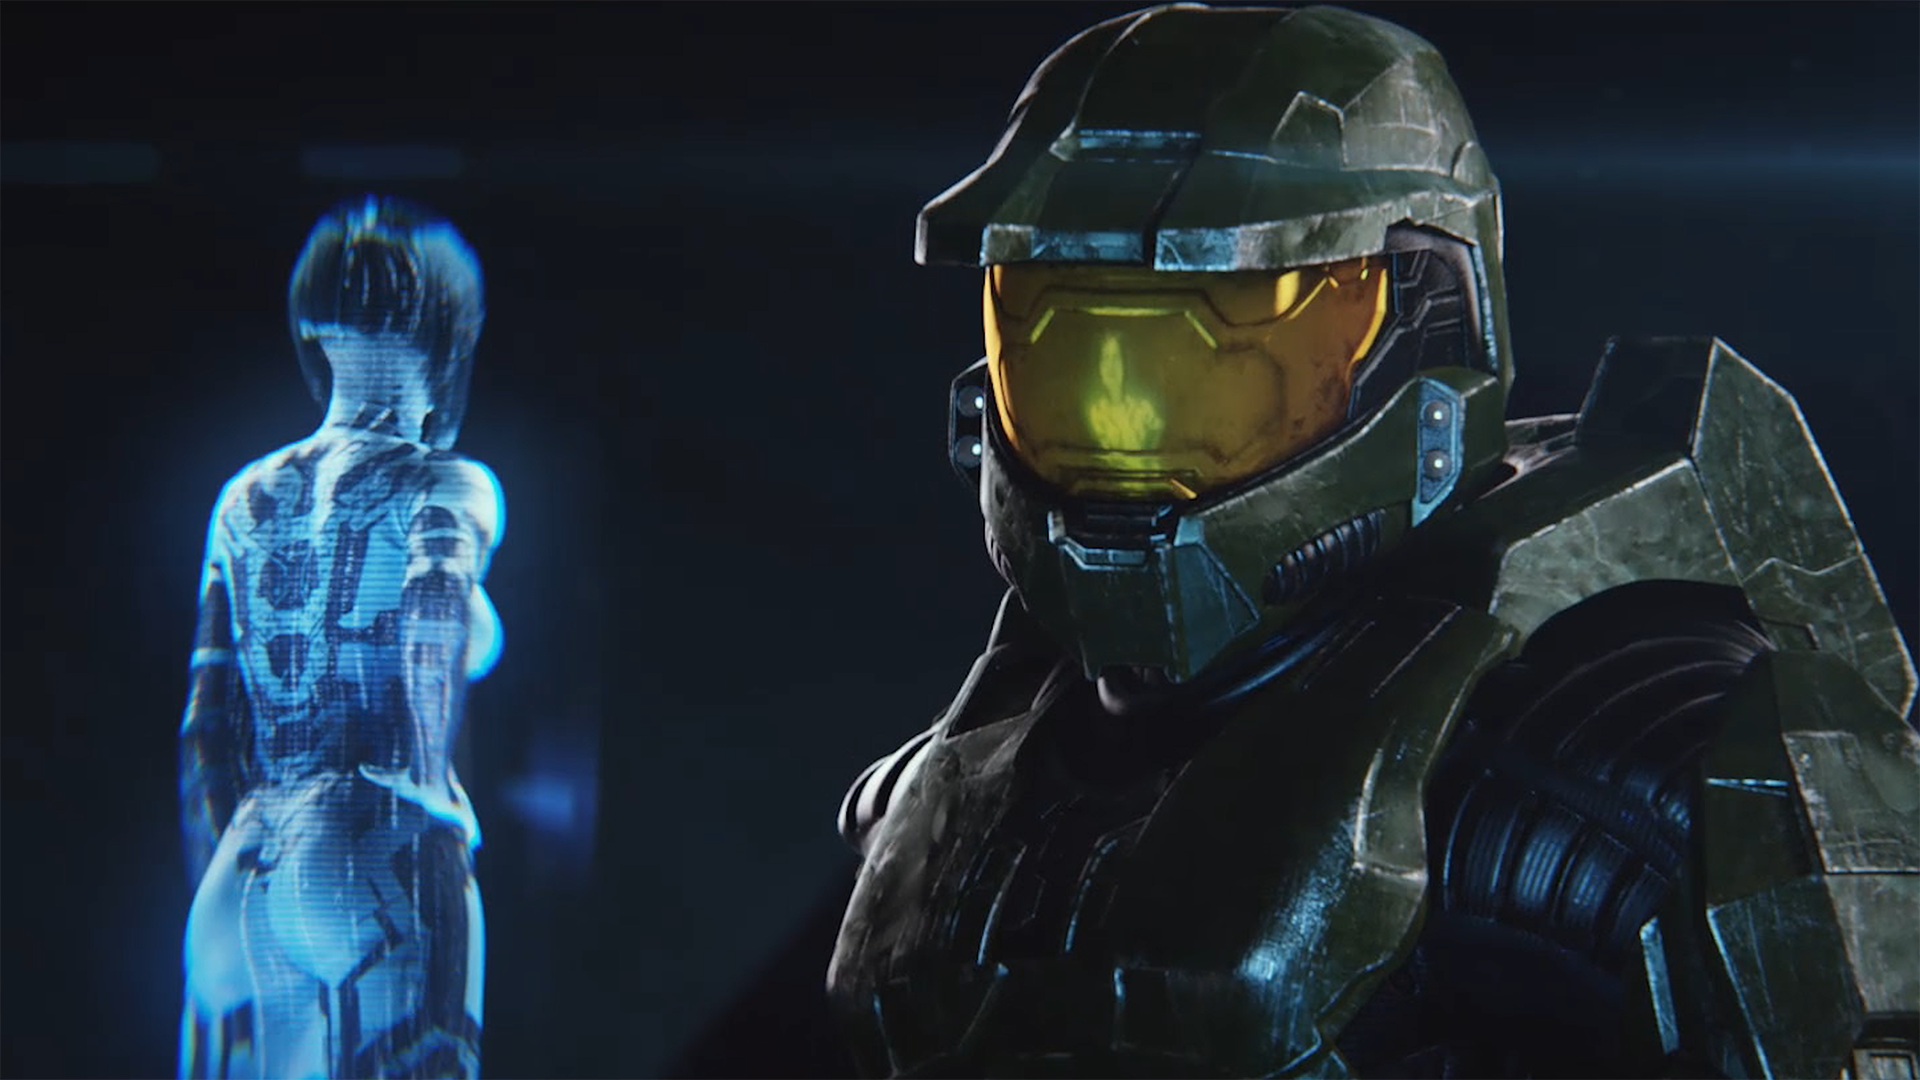 Halo: Reach now available for Xbox One, Windows 10 and Steam, plus